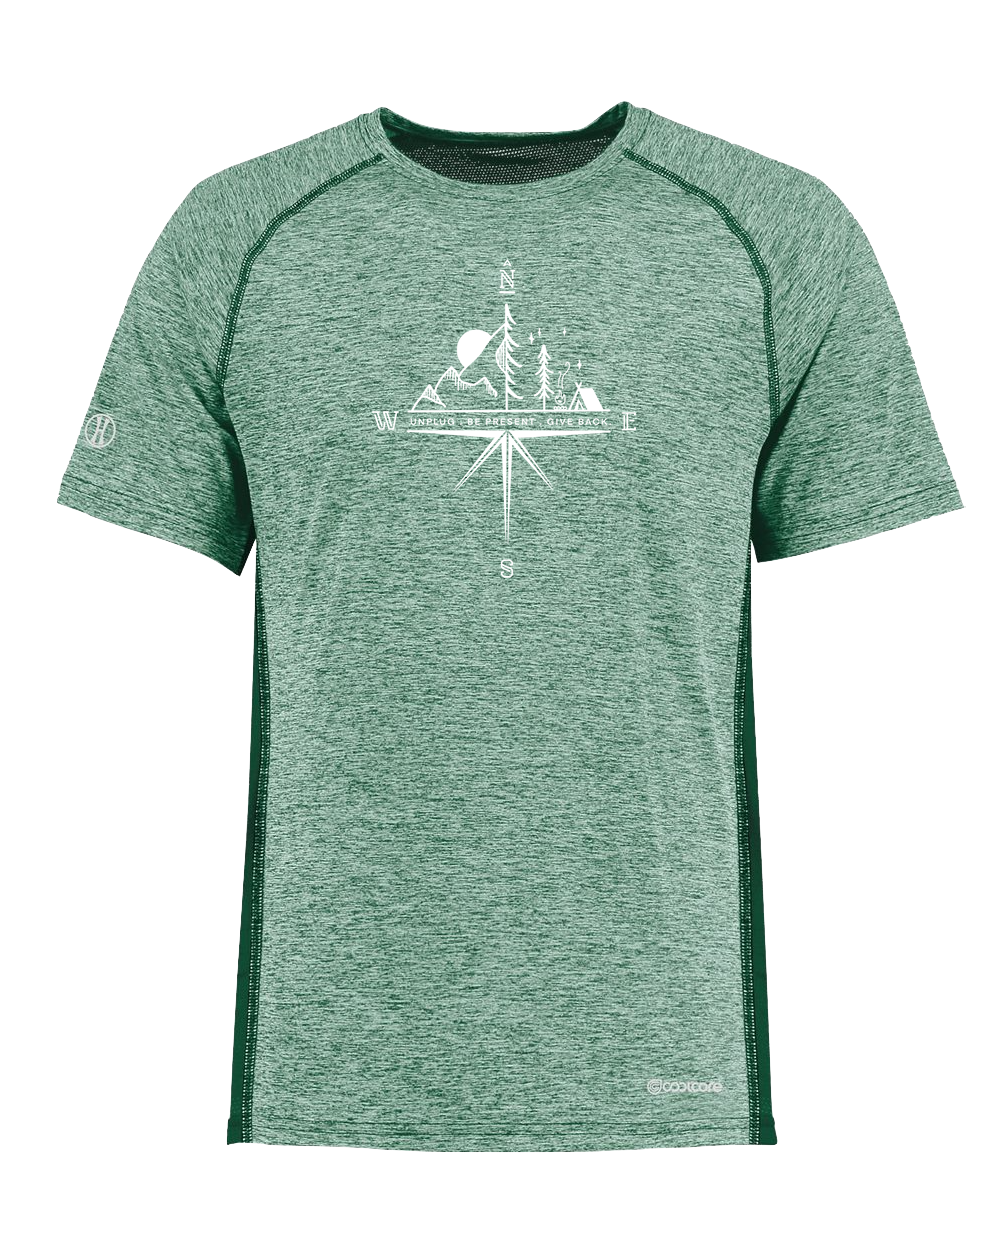 COMPASS MOUNTAIN SCENE Poly/Elastane High Performance T-Shirt with UPF 50+